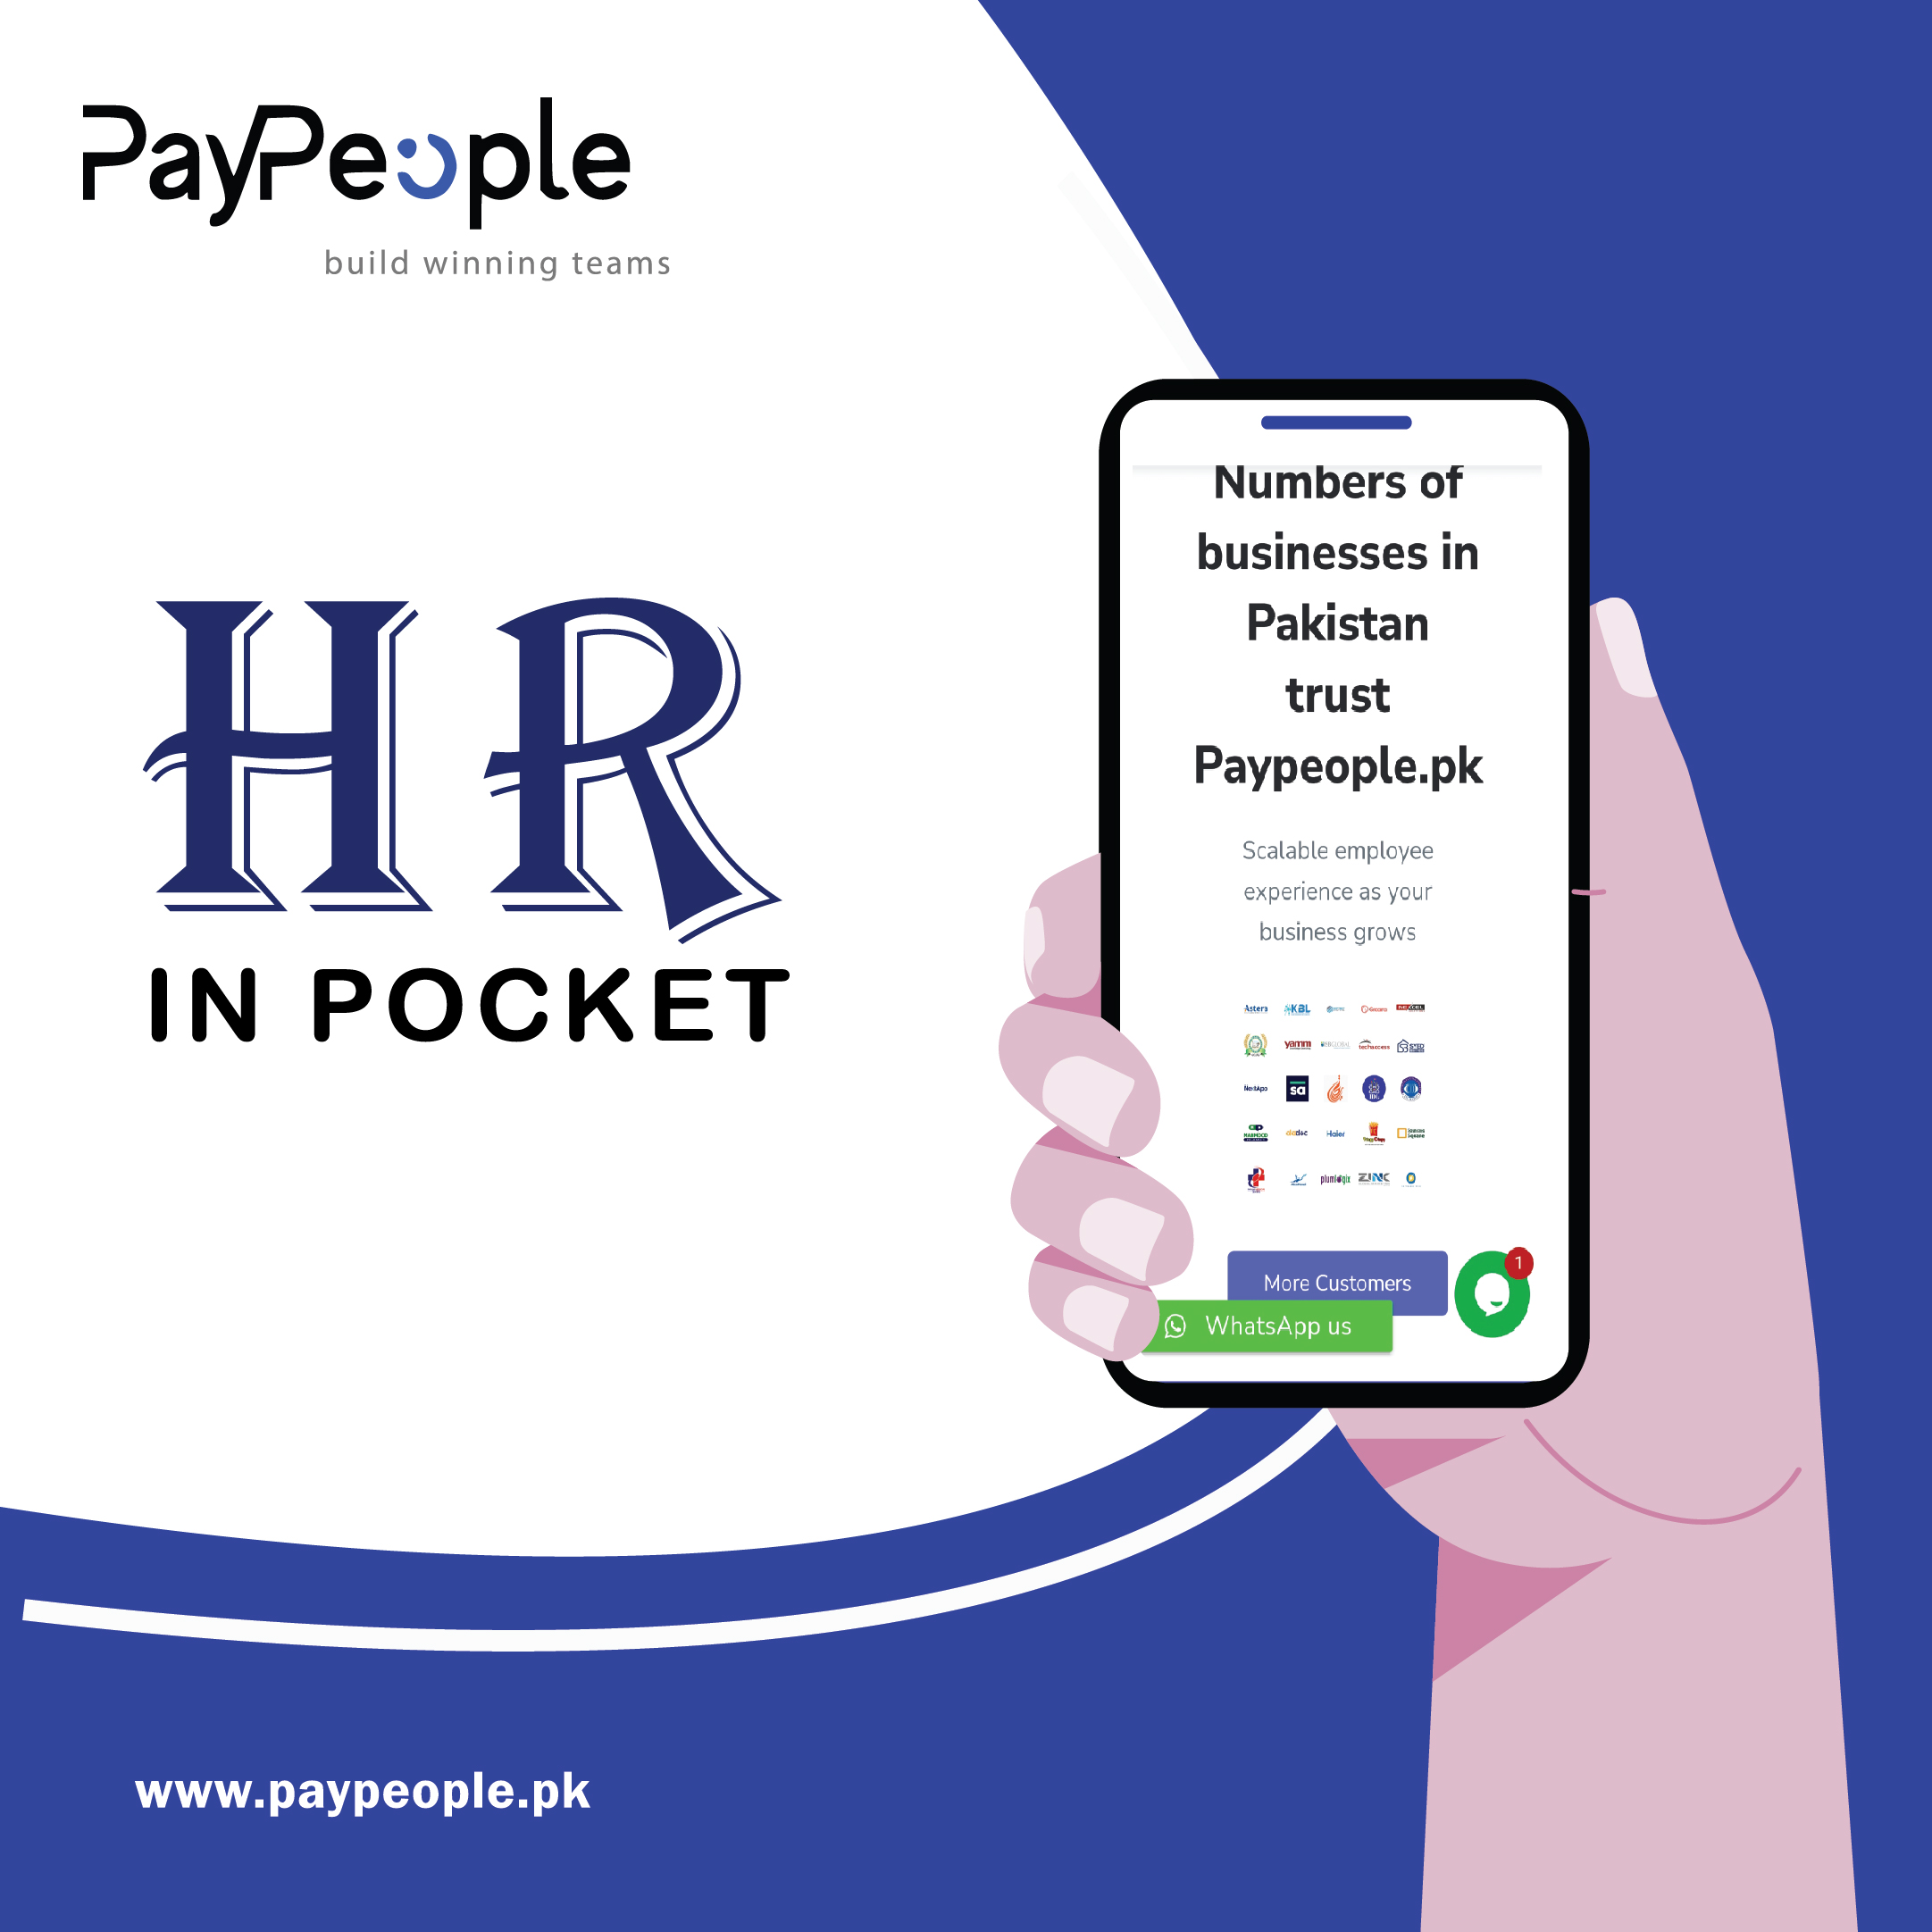 How does HR System in Pakistan enhance payroll processing?